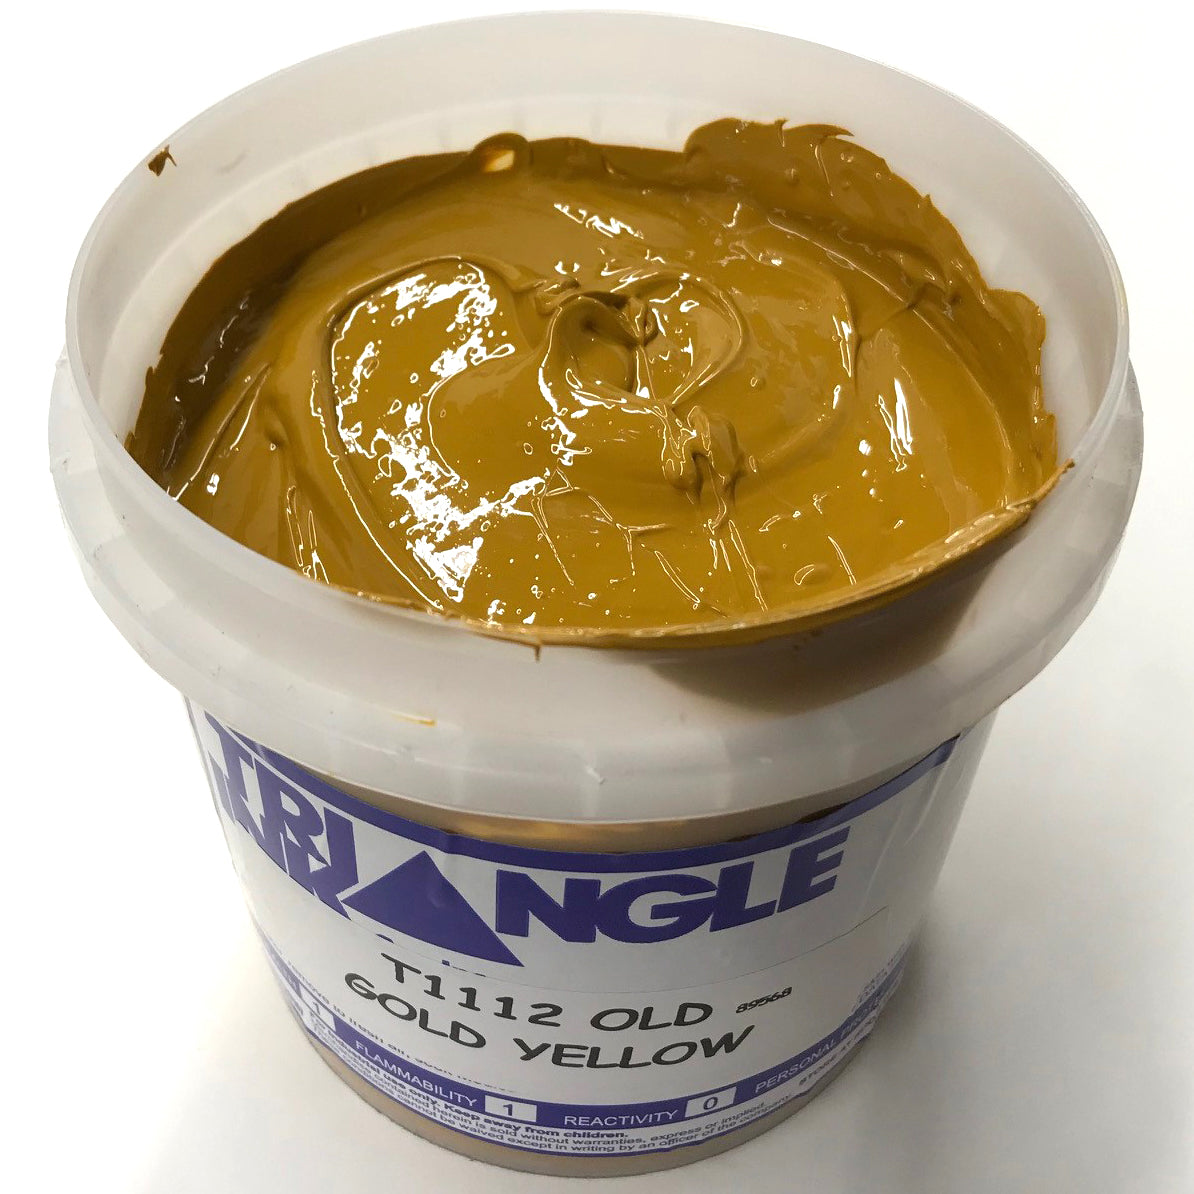 TRIANGLE 1112 OLD GOLD YELLOW PLASTISOL OIL BASE INK FOR SILK SCREEN PRINTING